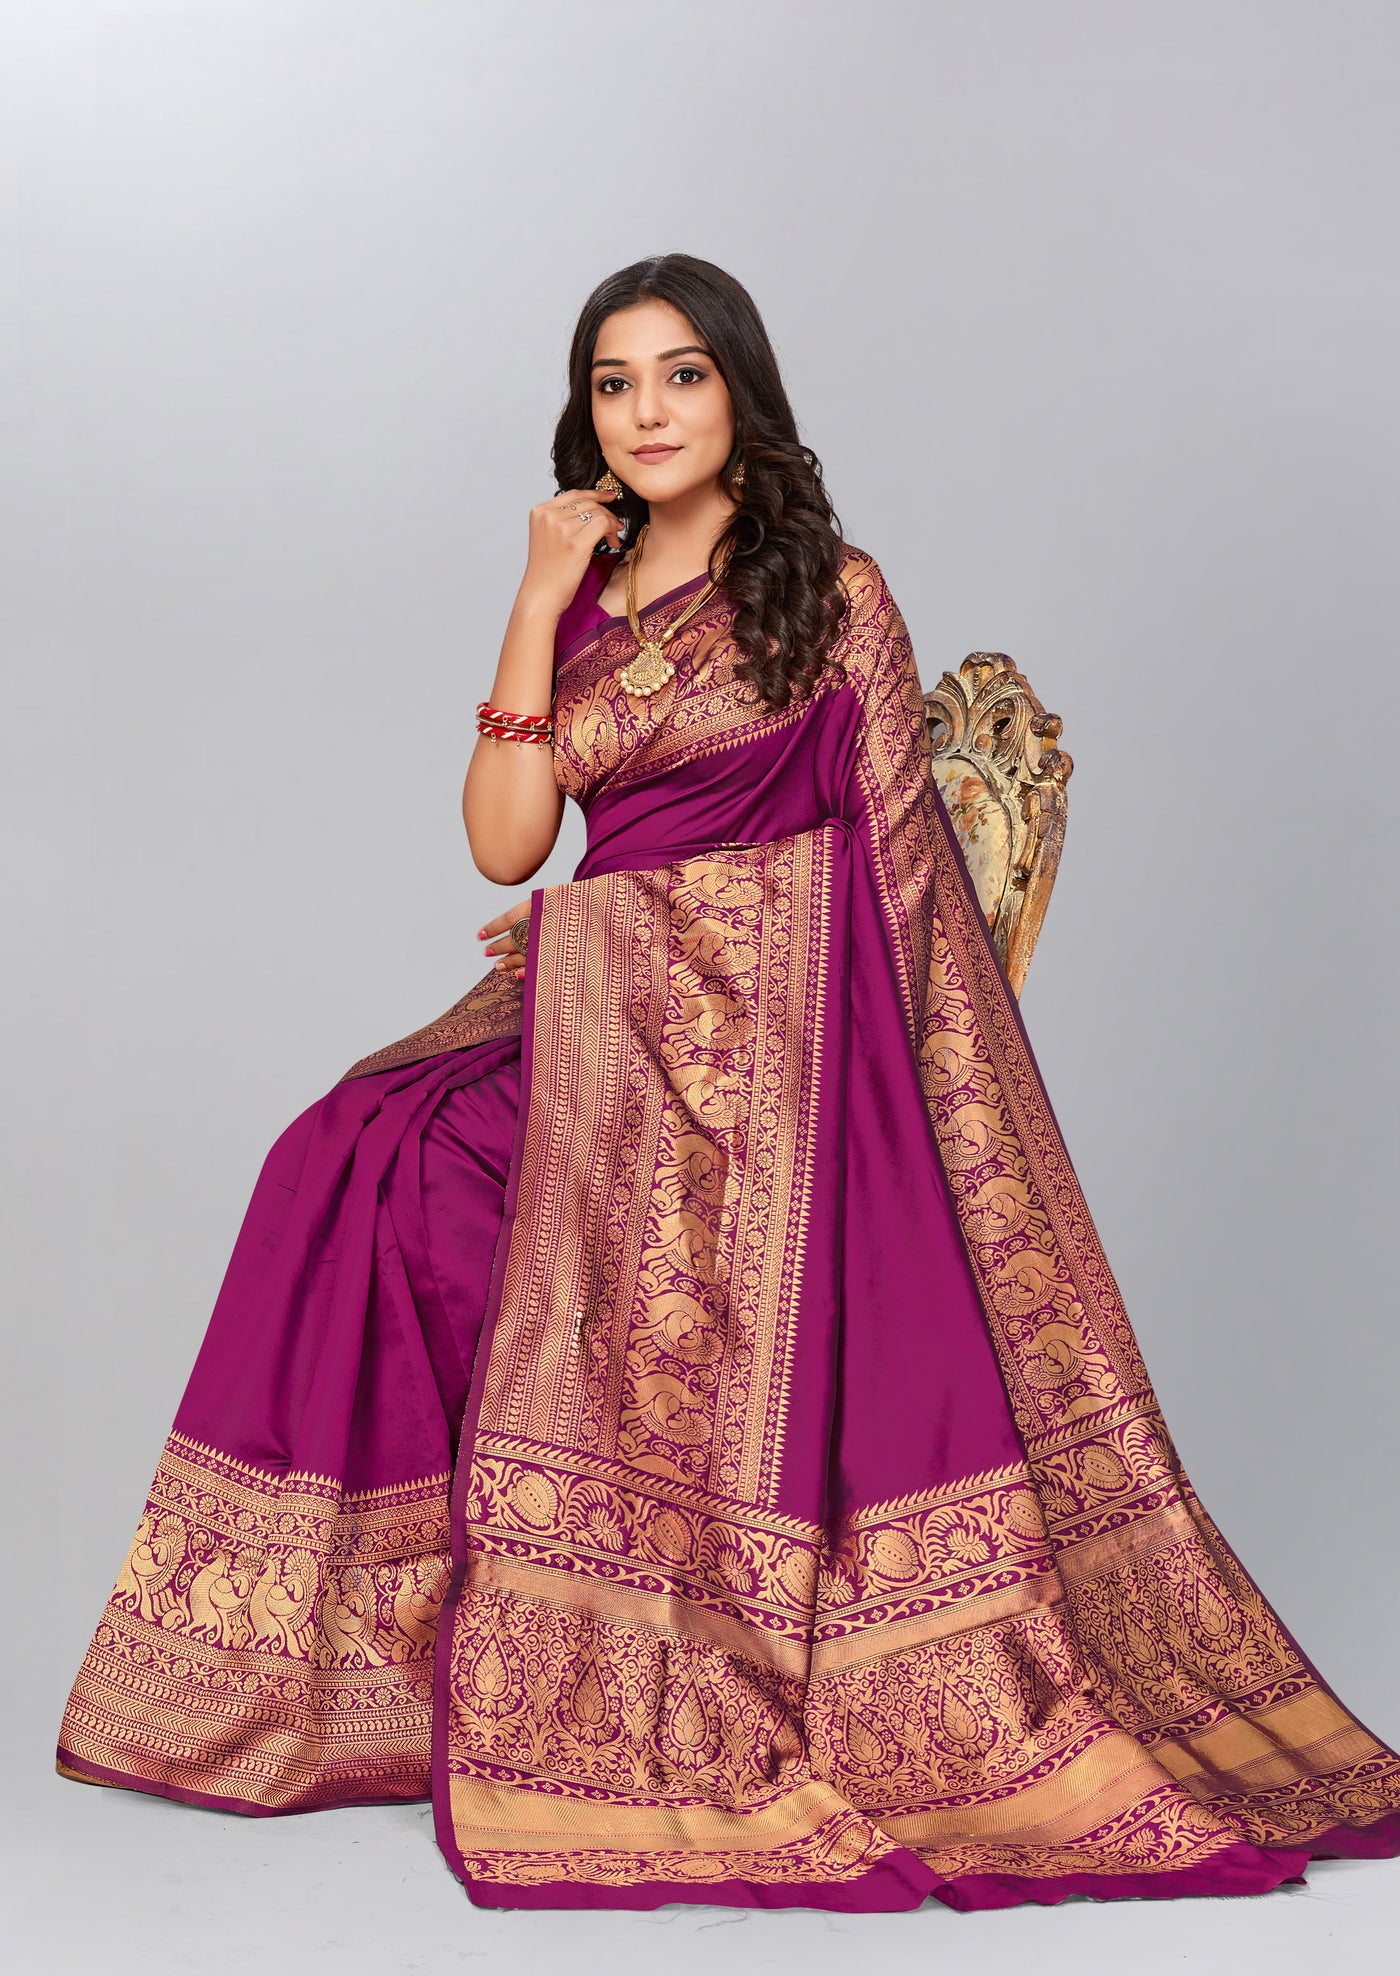 Purple Banarsi Art Silk Saree - Indian Clothing in Denver, CO, Aurora, CO, Boulder, CO, Fort Collins, CO, Colorado Springs, CO, Parker, CO, Highlands Ranch, CO, Cherry Creek, CO, Centennial, CO, and Longmont, CO. Nationwide shipping USA - India Fashion X